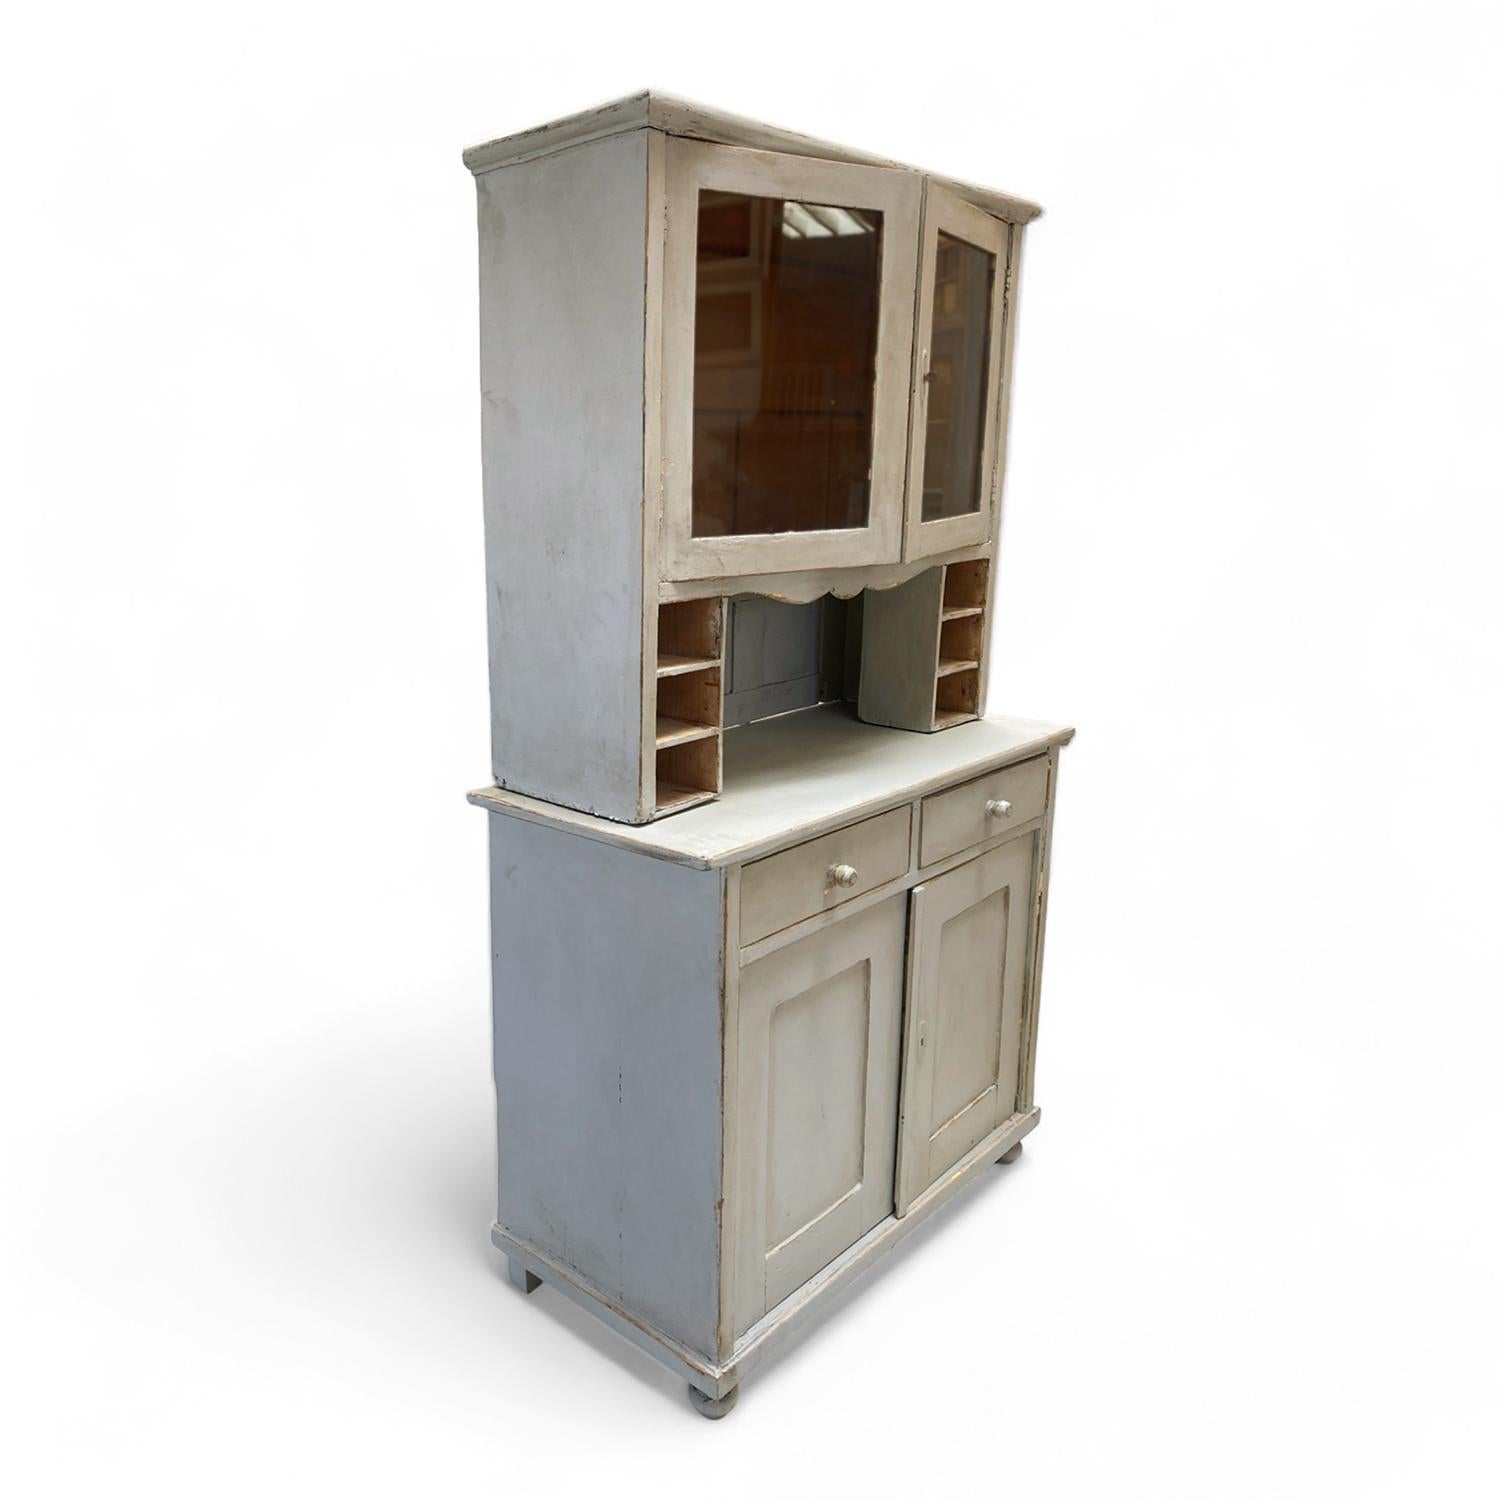 This country hutch is has a soft baby blue finish achieved through traditional milk-painting techniques, creating a beautifully aged patina that evokes a sense of history and warmth. Featuring charming vintage scalloped edges and stepback shelving